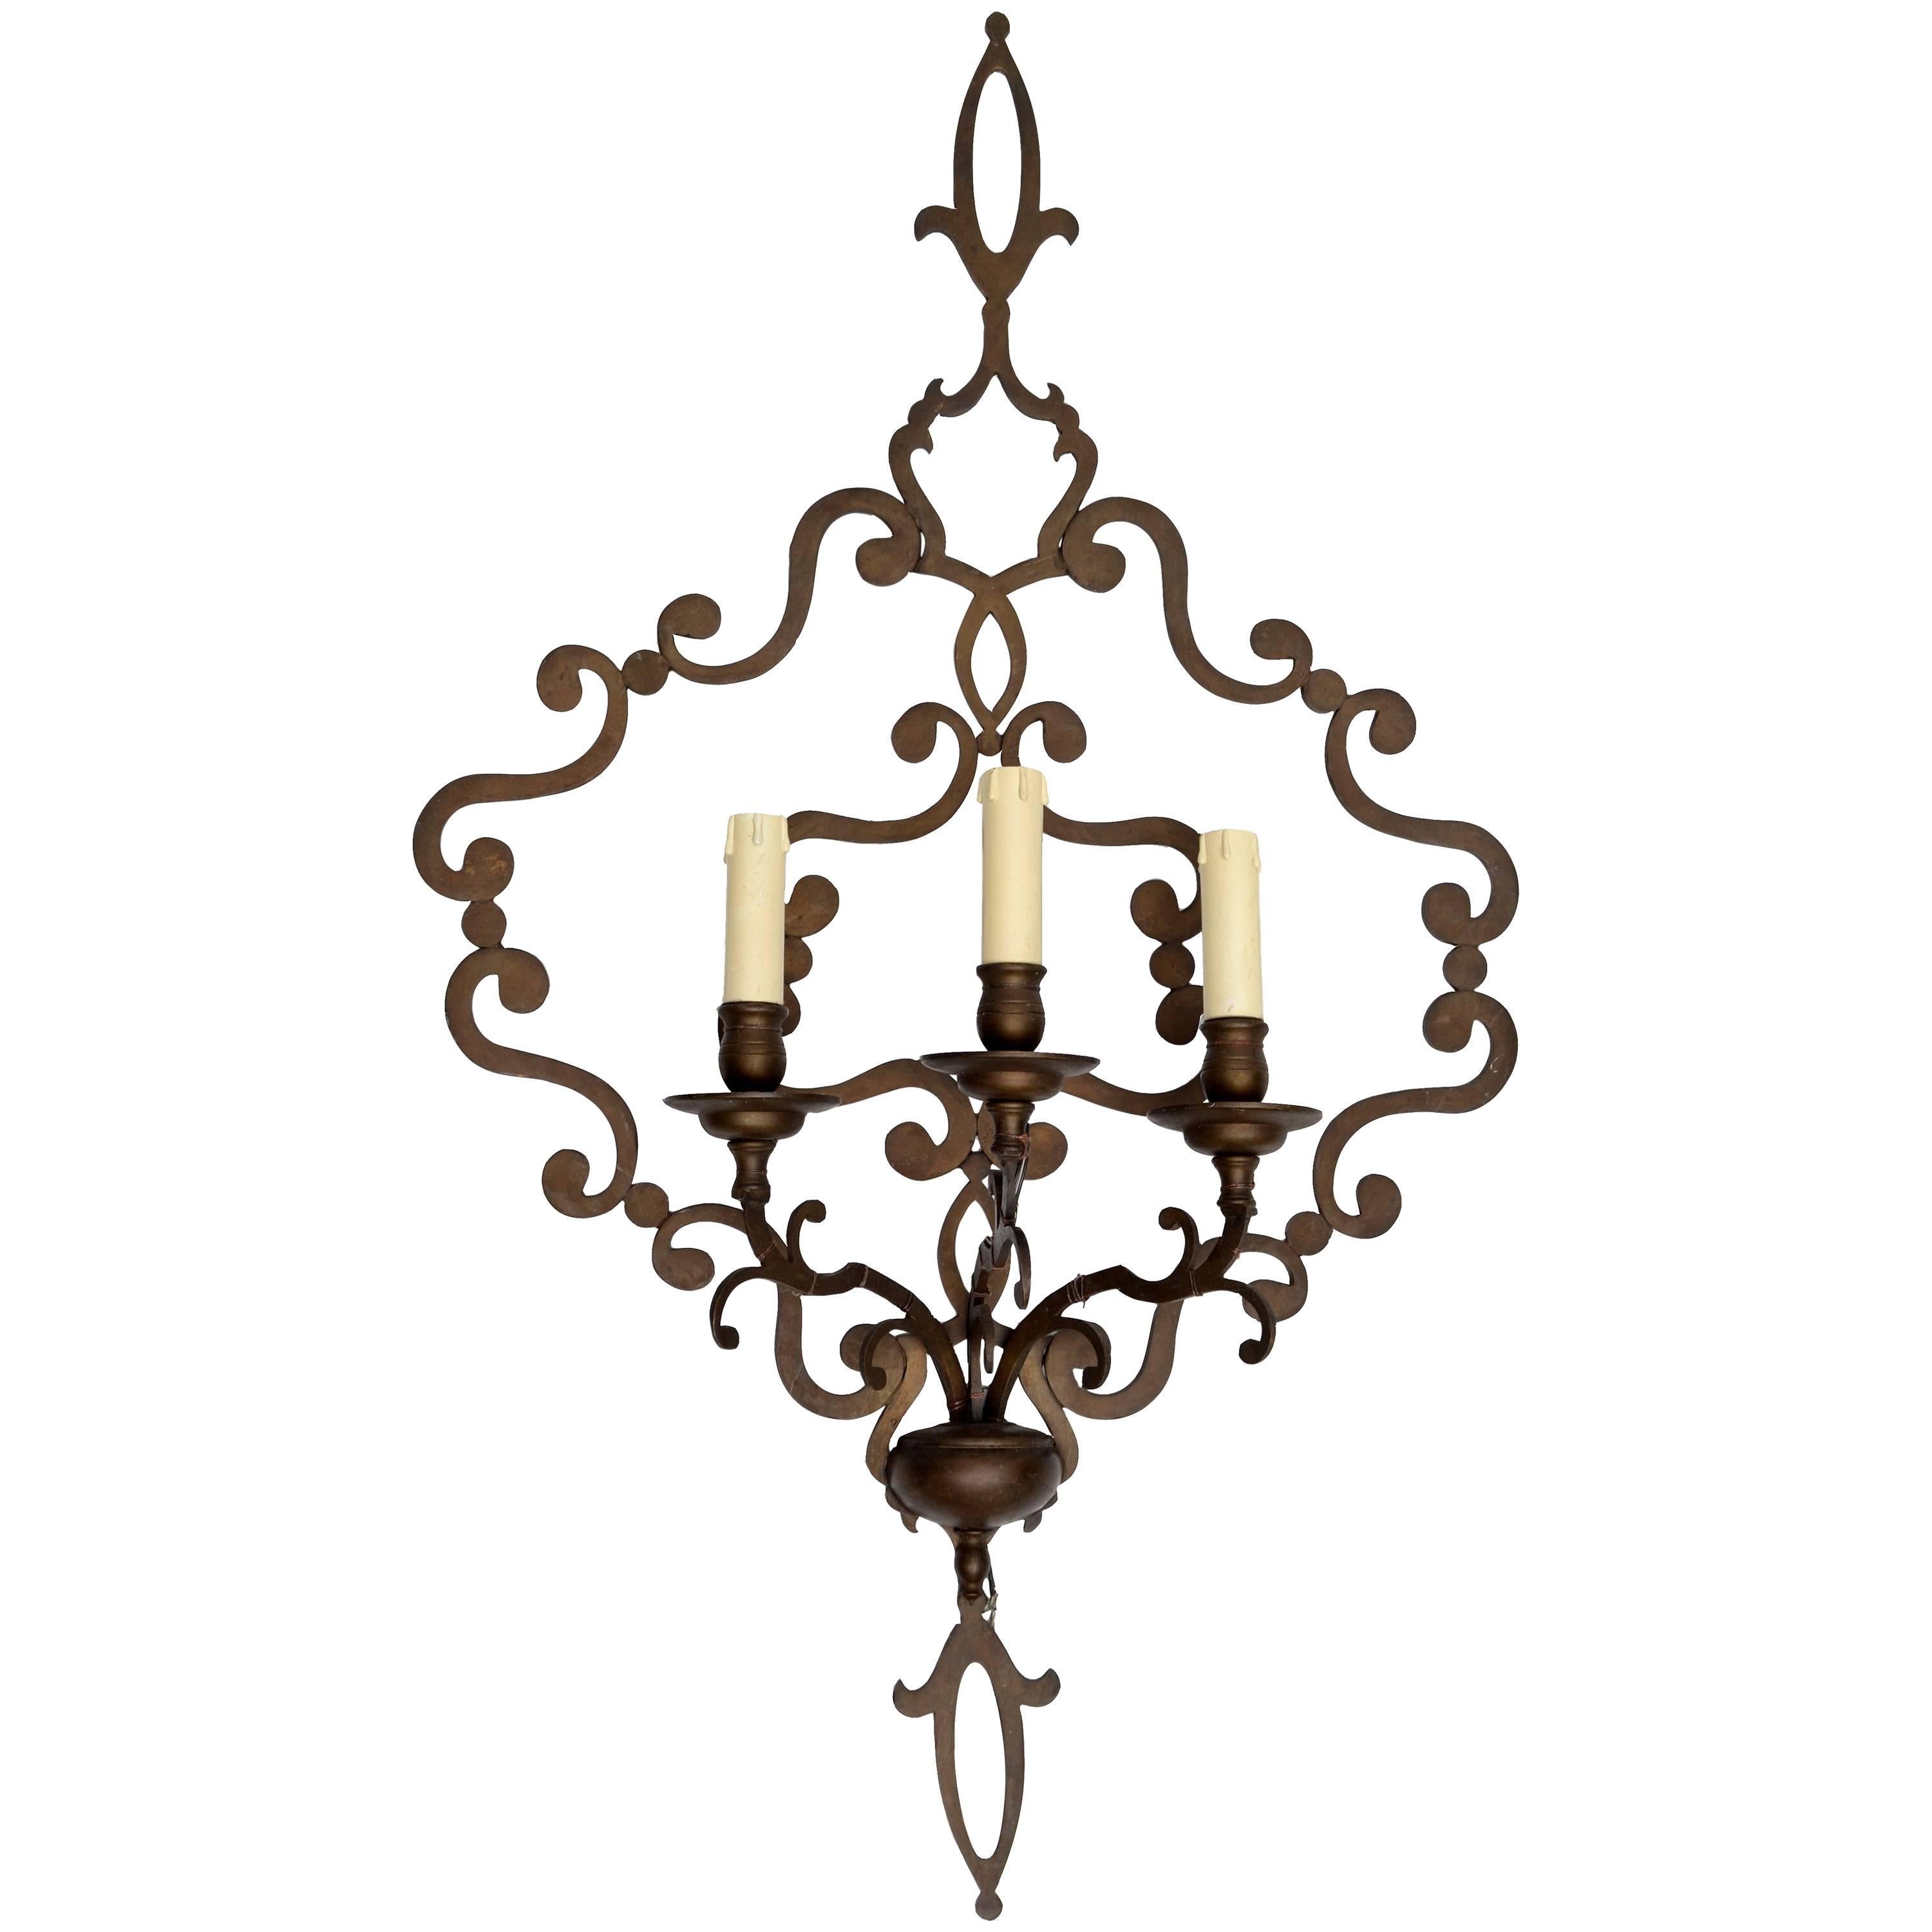 1940s Italian Neoclassical Wrought Iron Applique 3 Light Wall Sconce 